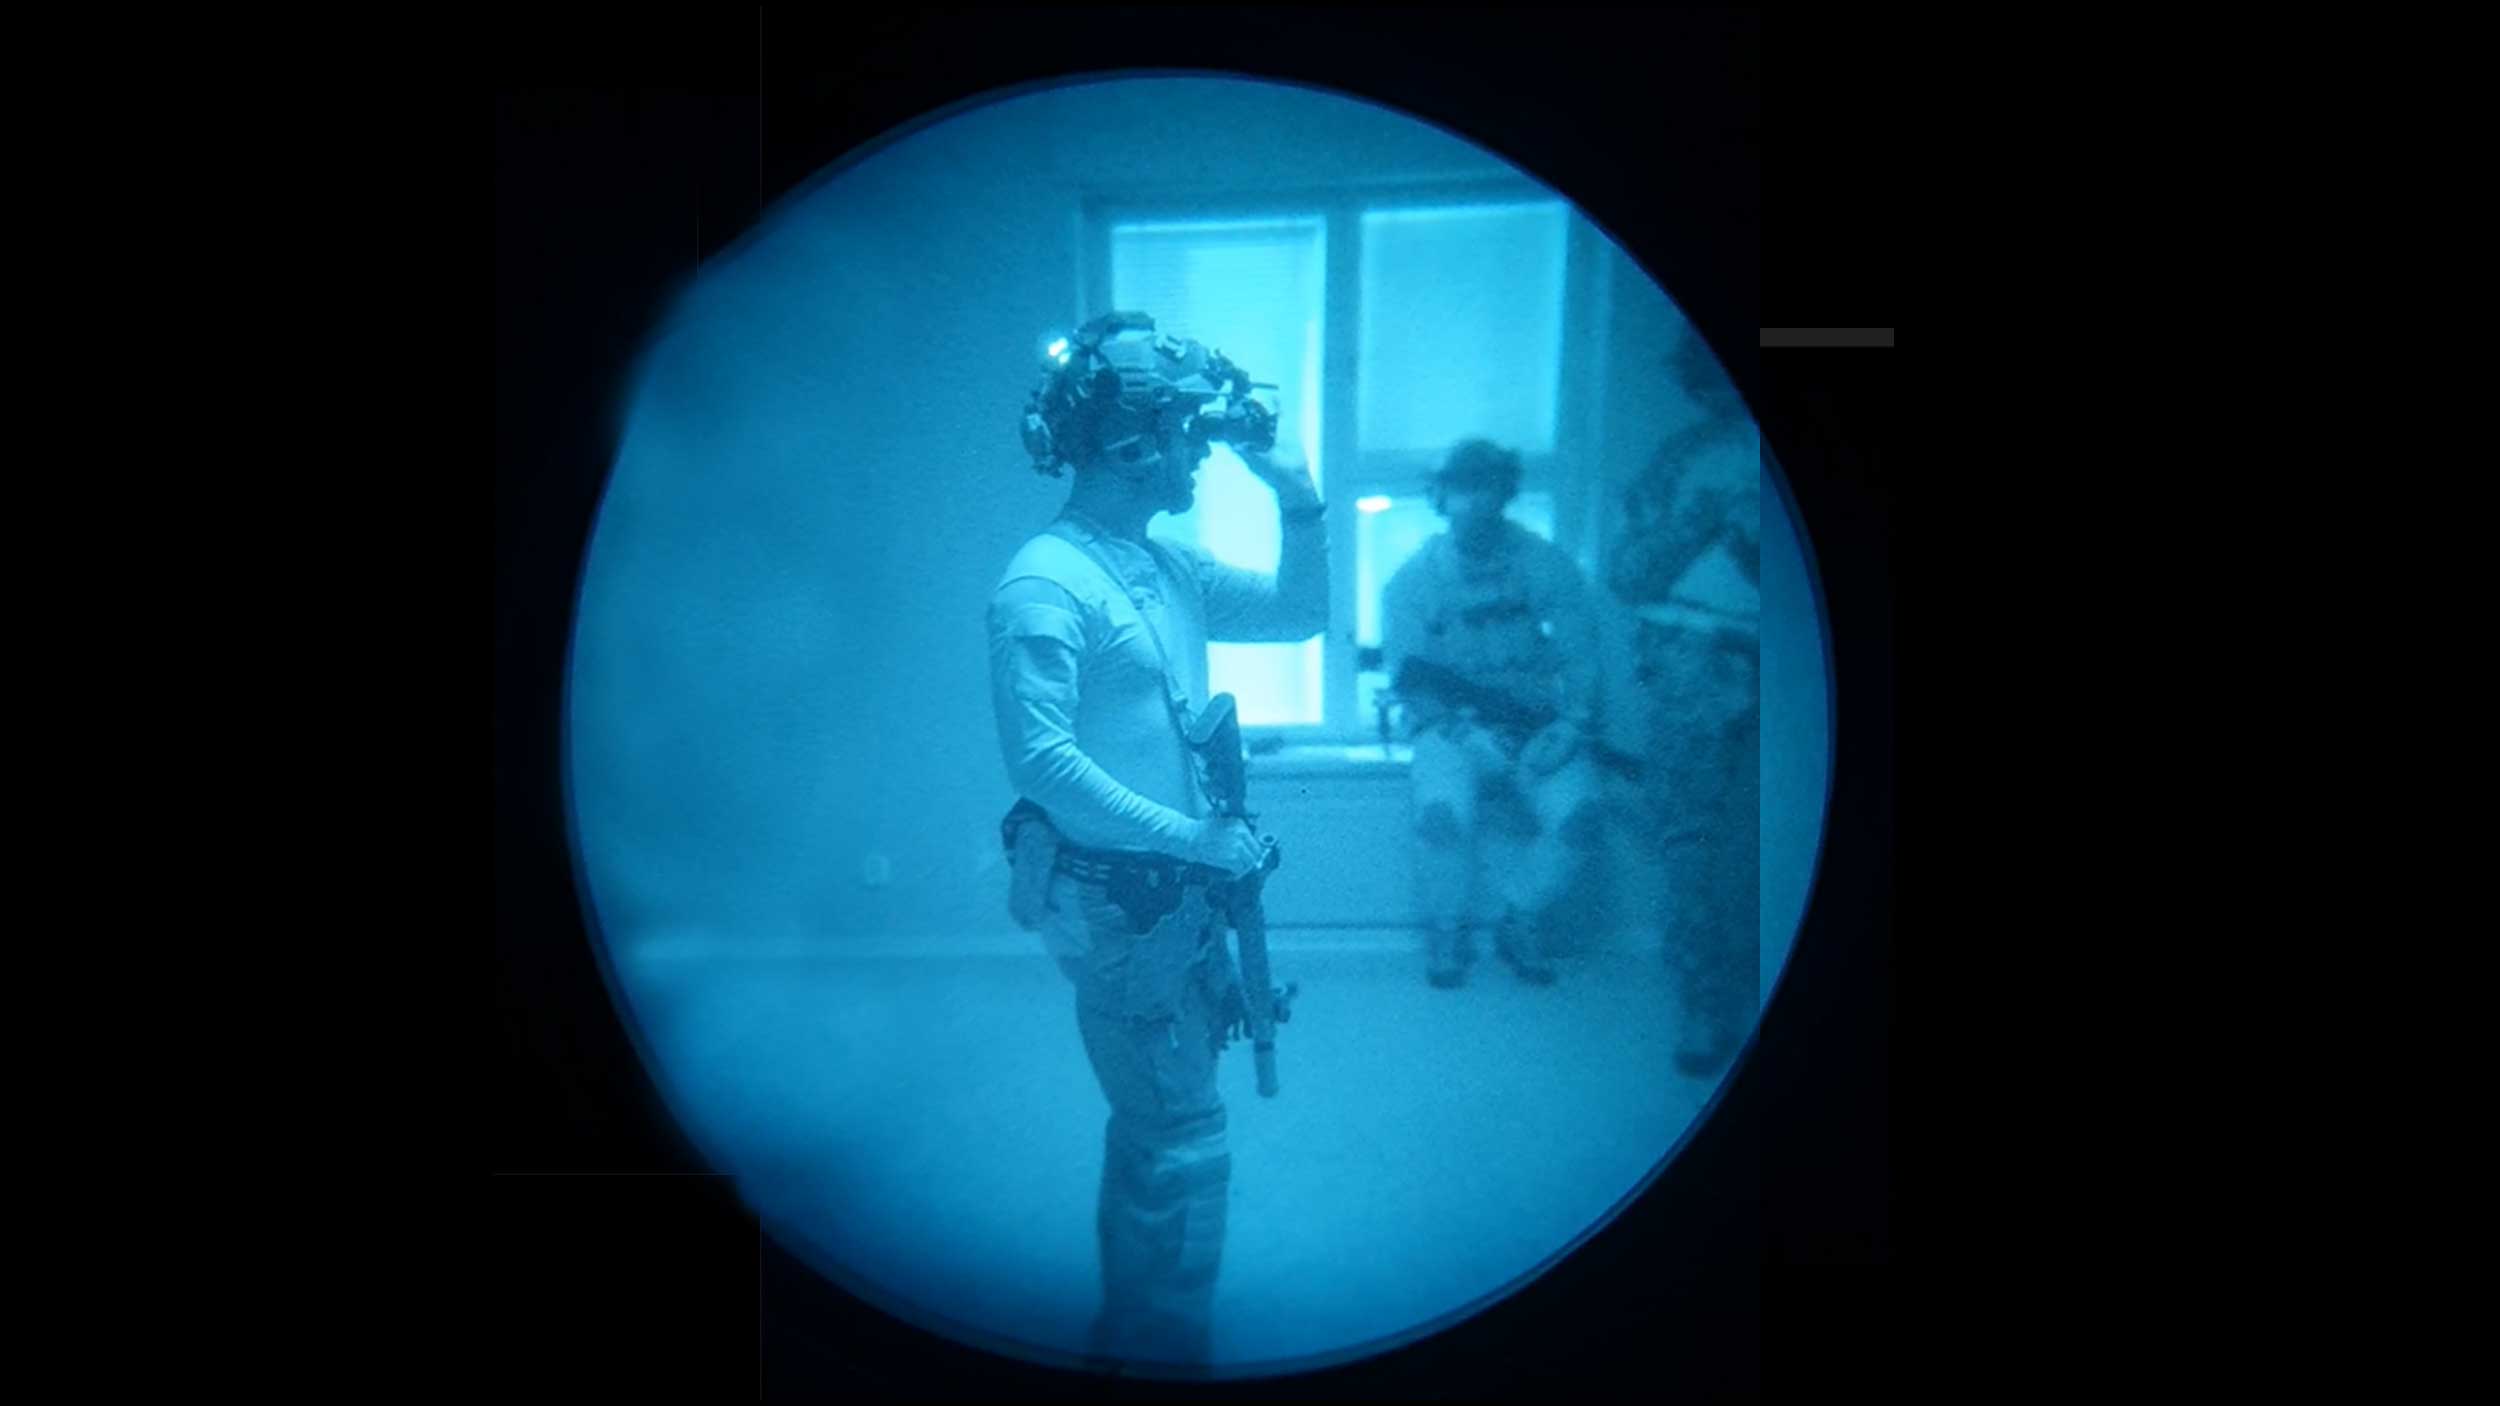 Learning to use night vision goggles on a course